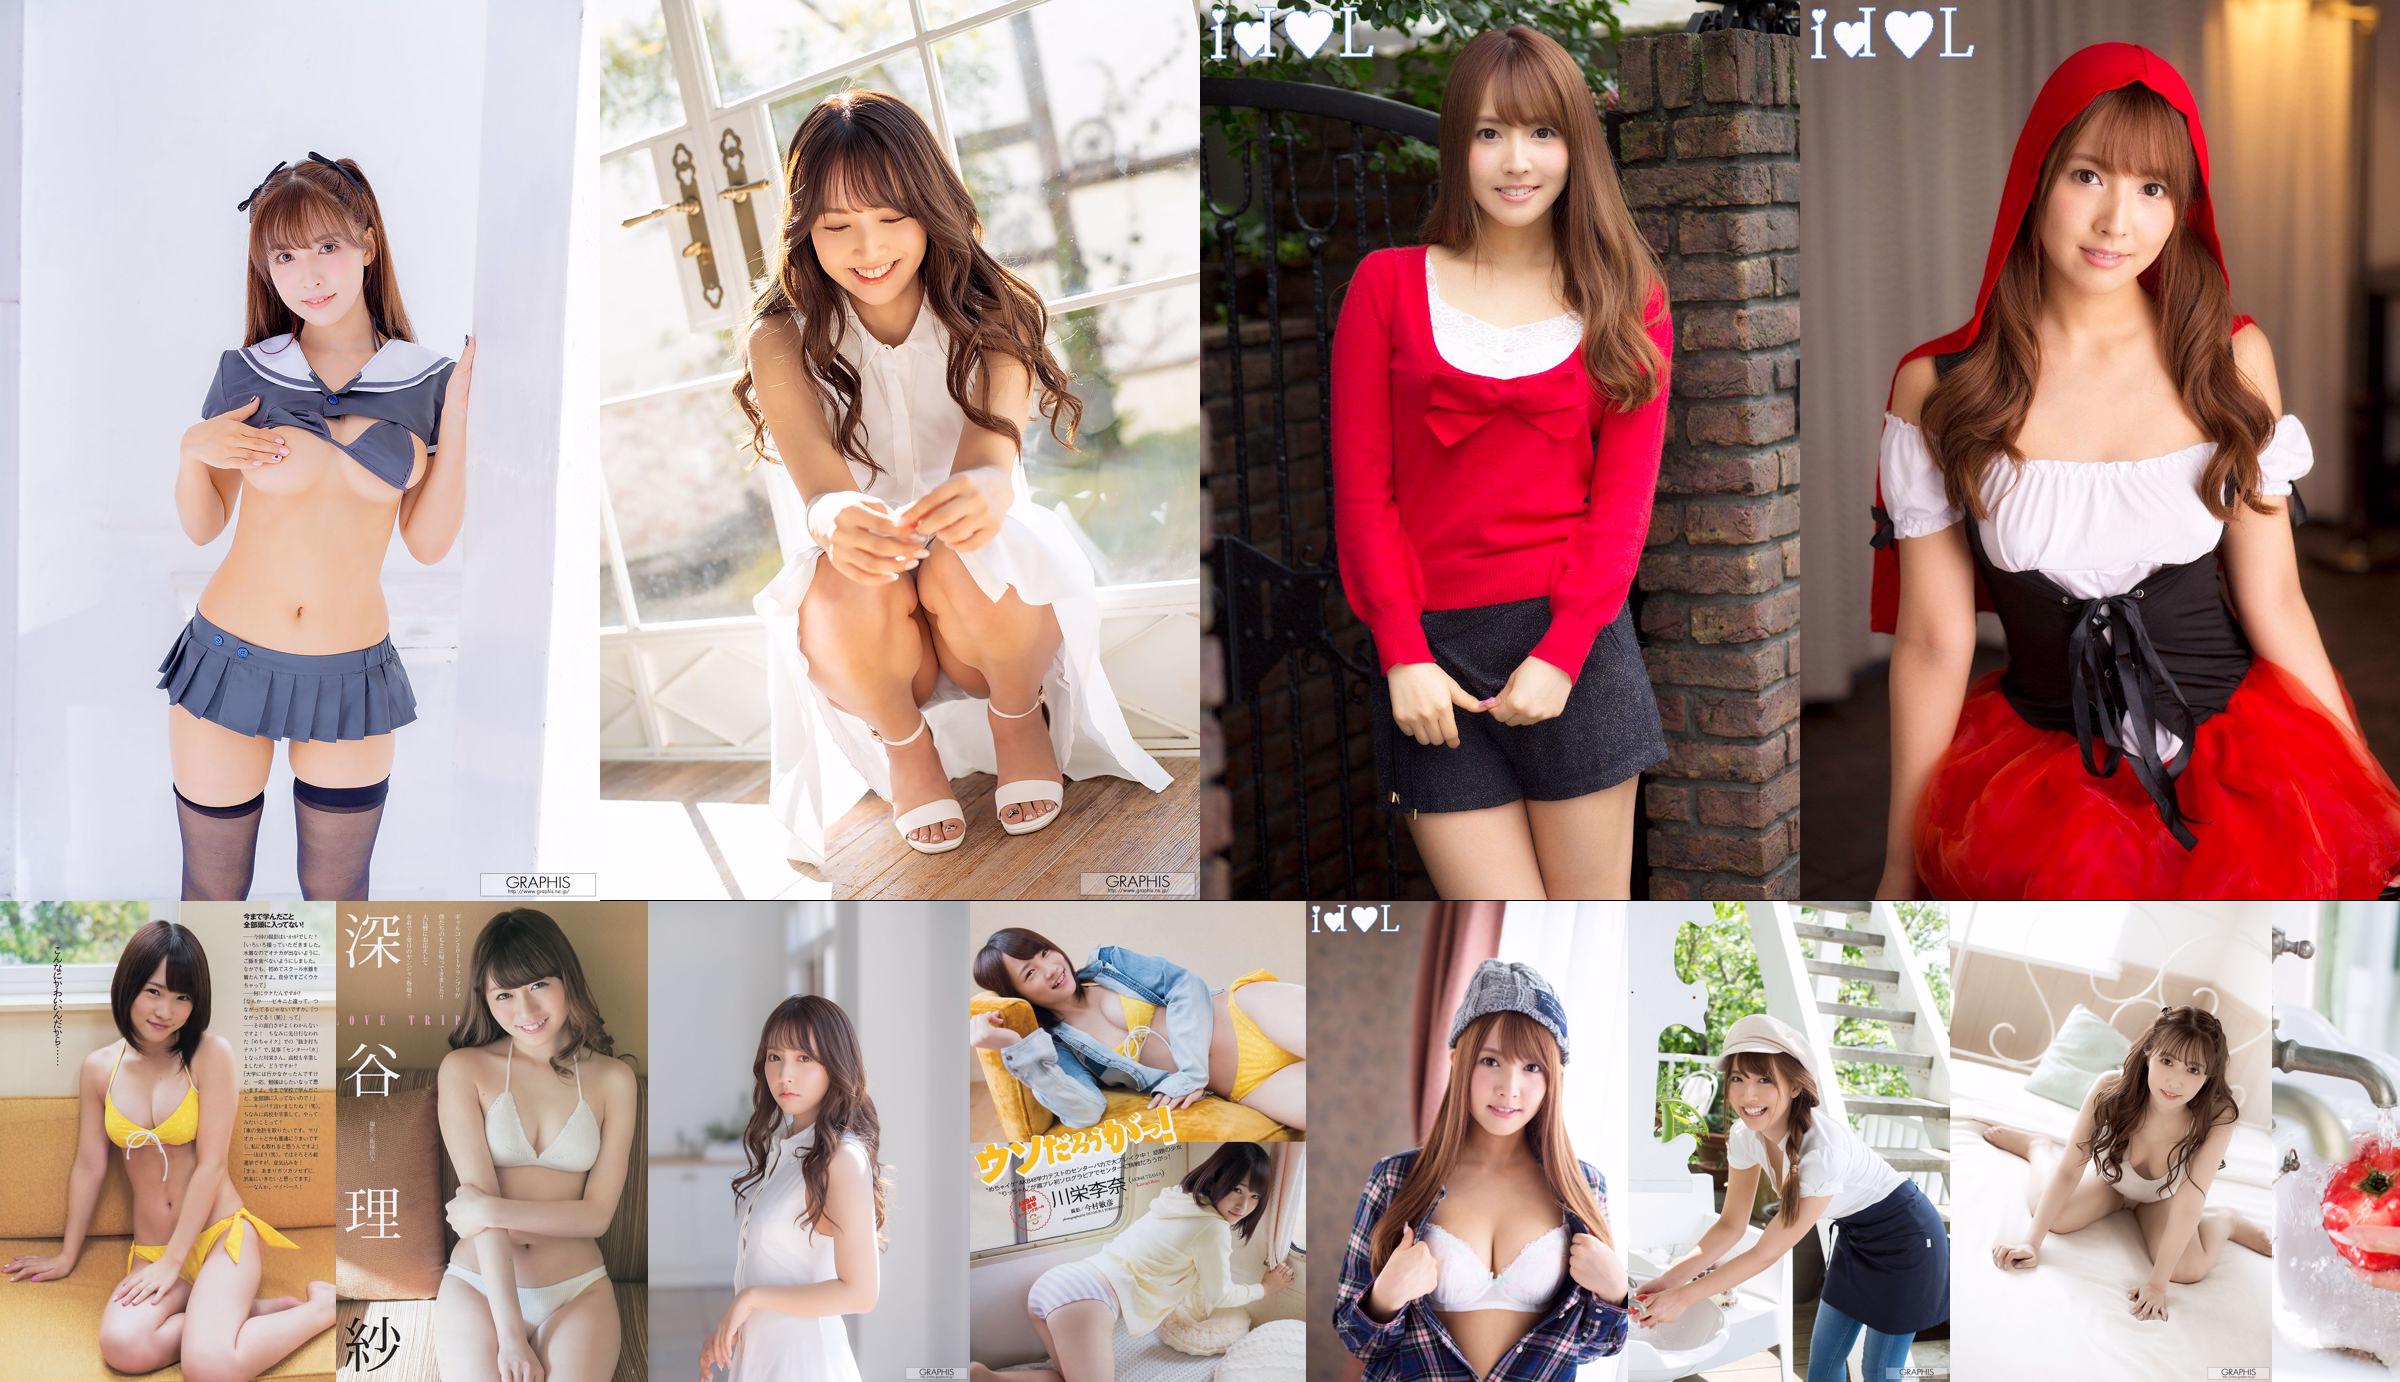 Mikami Yuya "Divine Sprout" [Graphis] Gals No.8a7433 Pagina 1